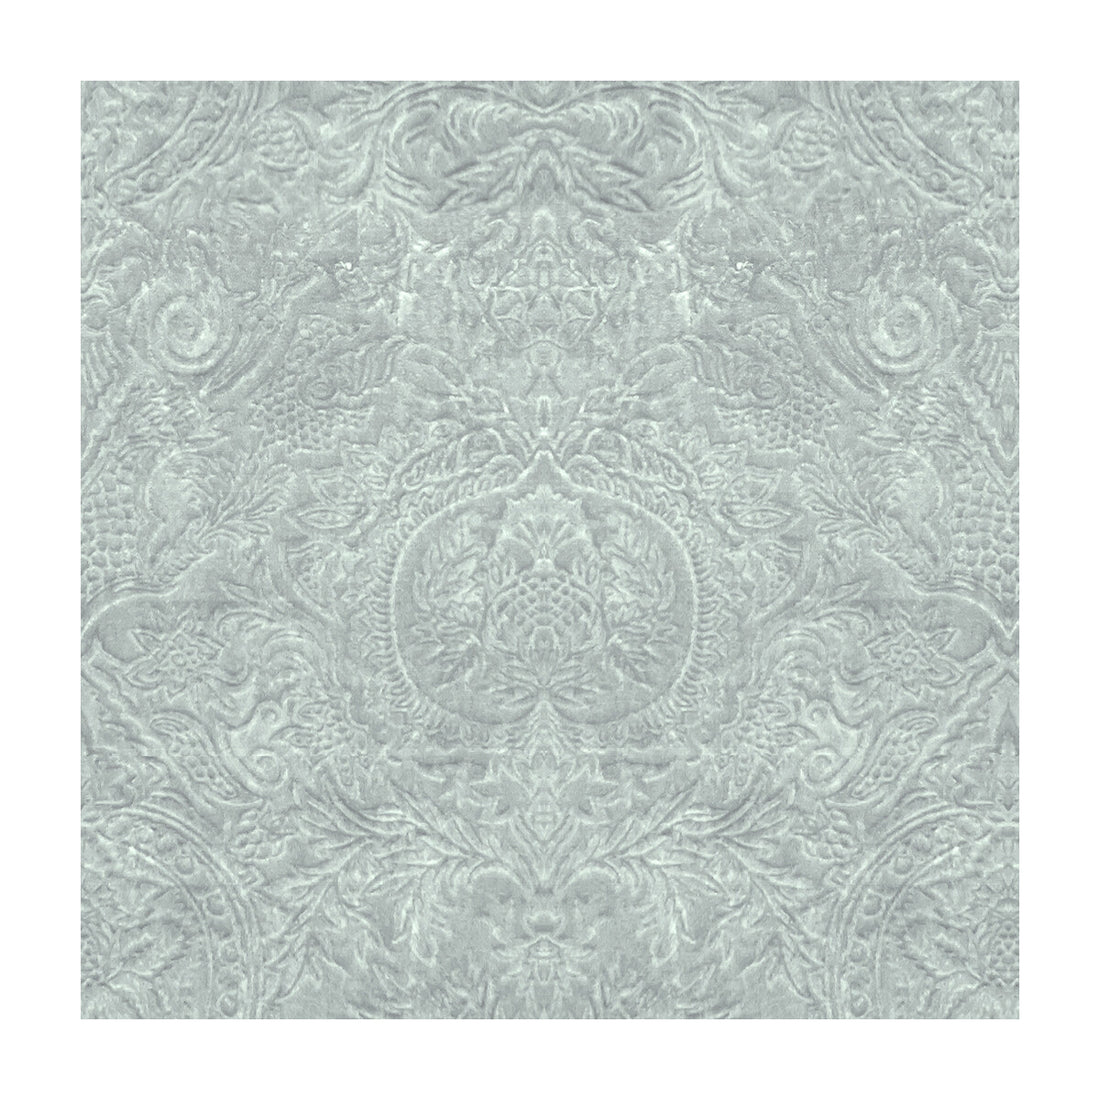 Chic Elegance fabric in glacier color - pattern 34004.15.0 - by Kravet Couture in the Modern Luxe II collection